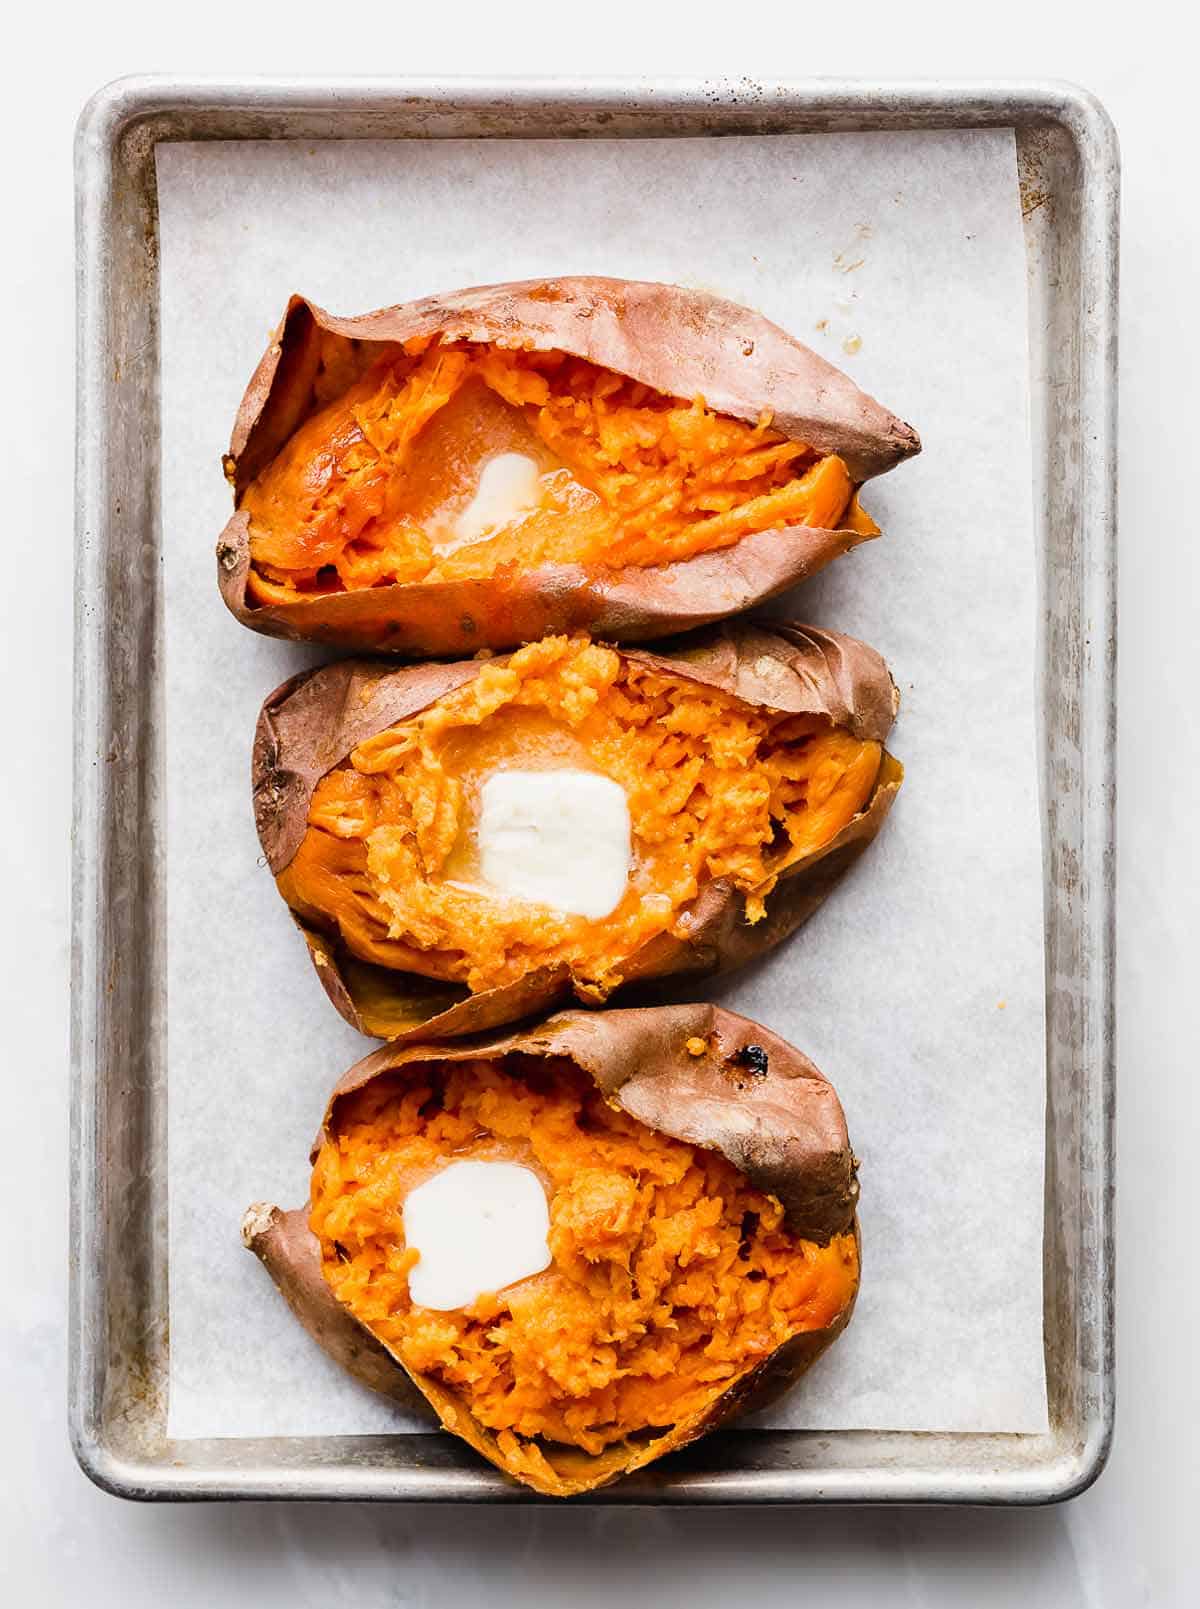 Three baked sweet potatoes on a baking sheet, each cut open with a square of butter in the orange flesh.